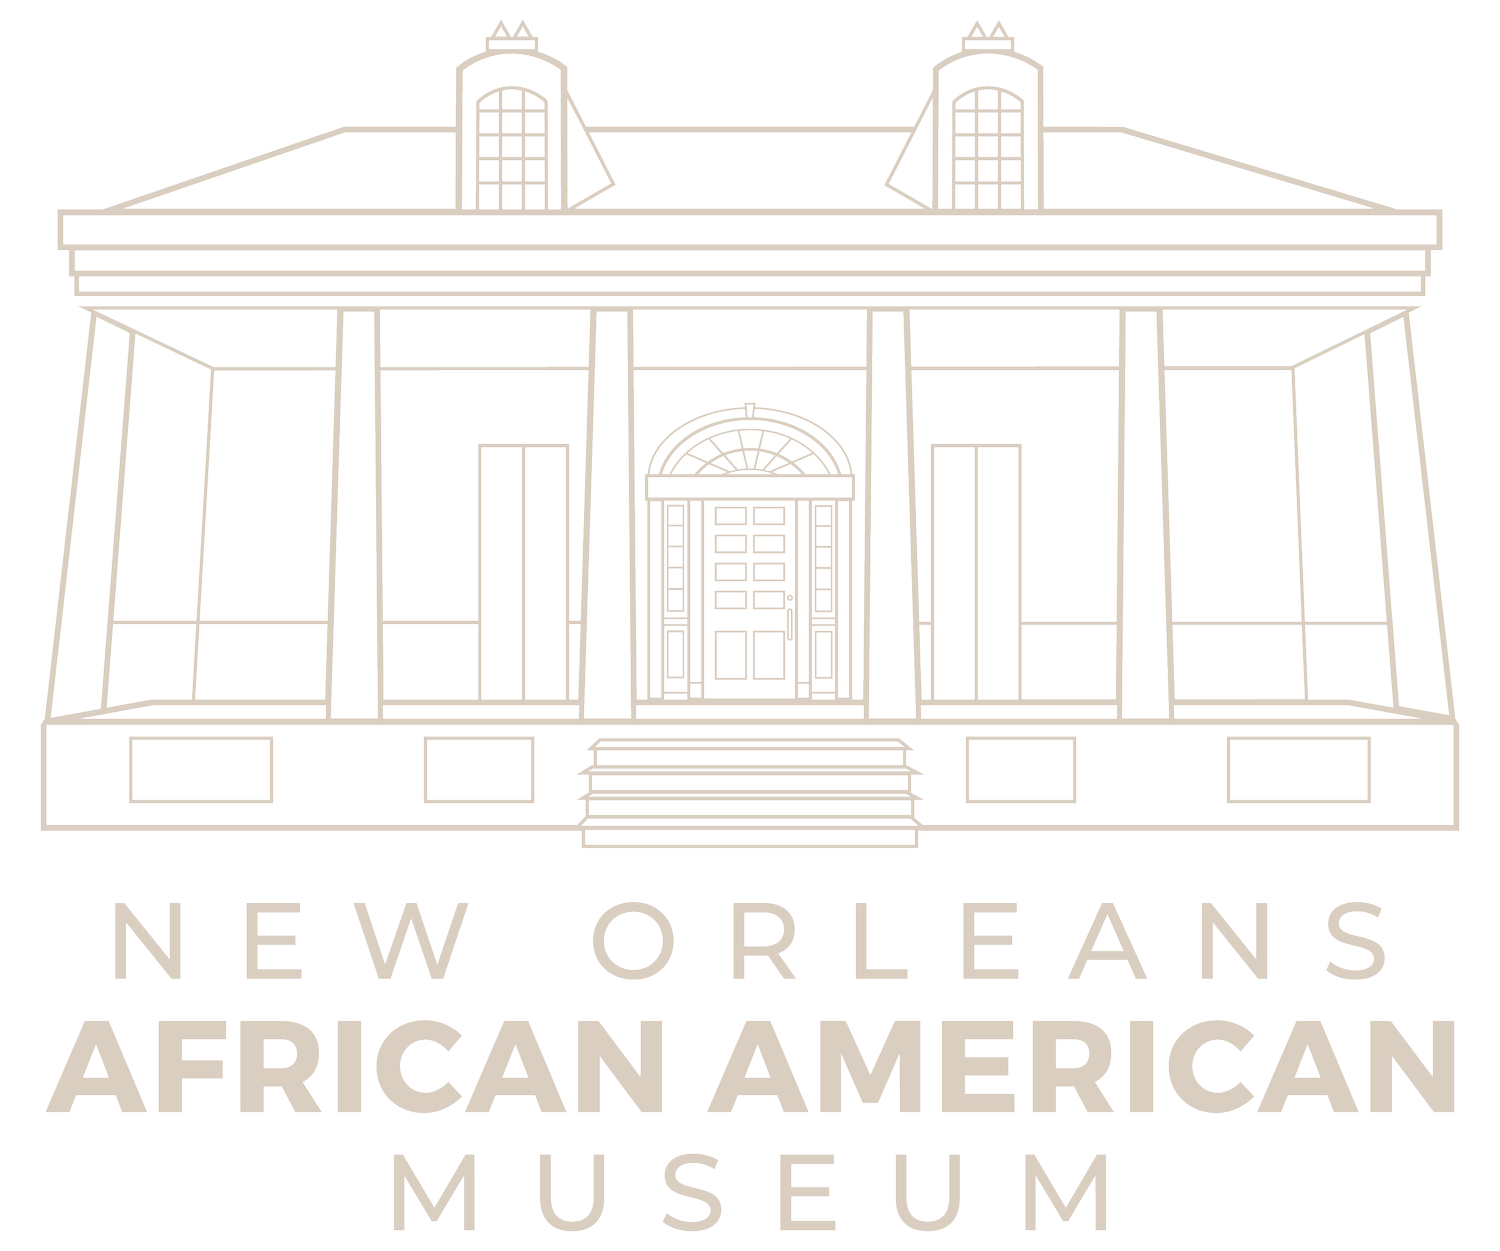 New Orleans African American Museum